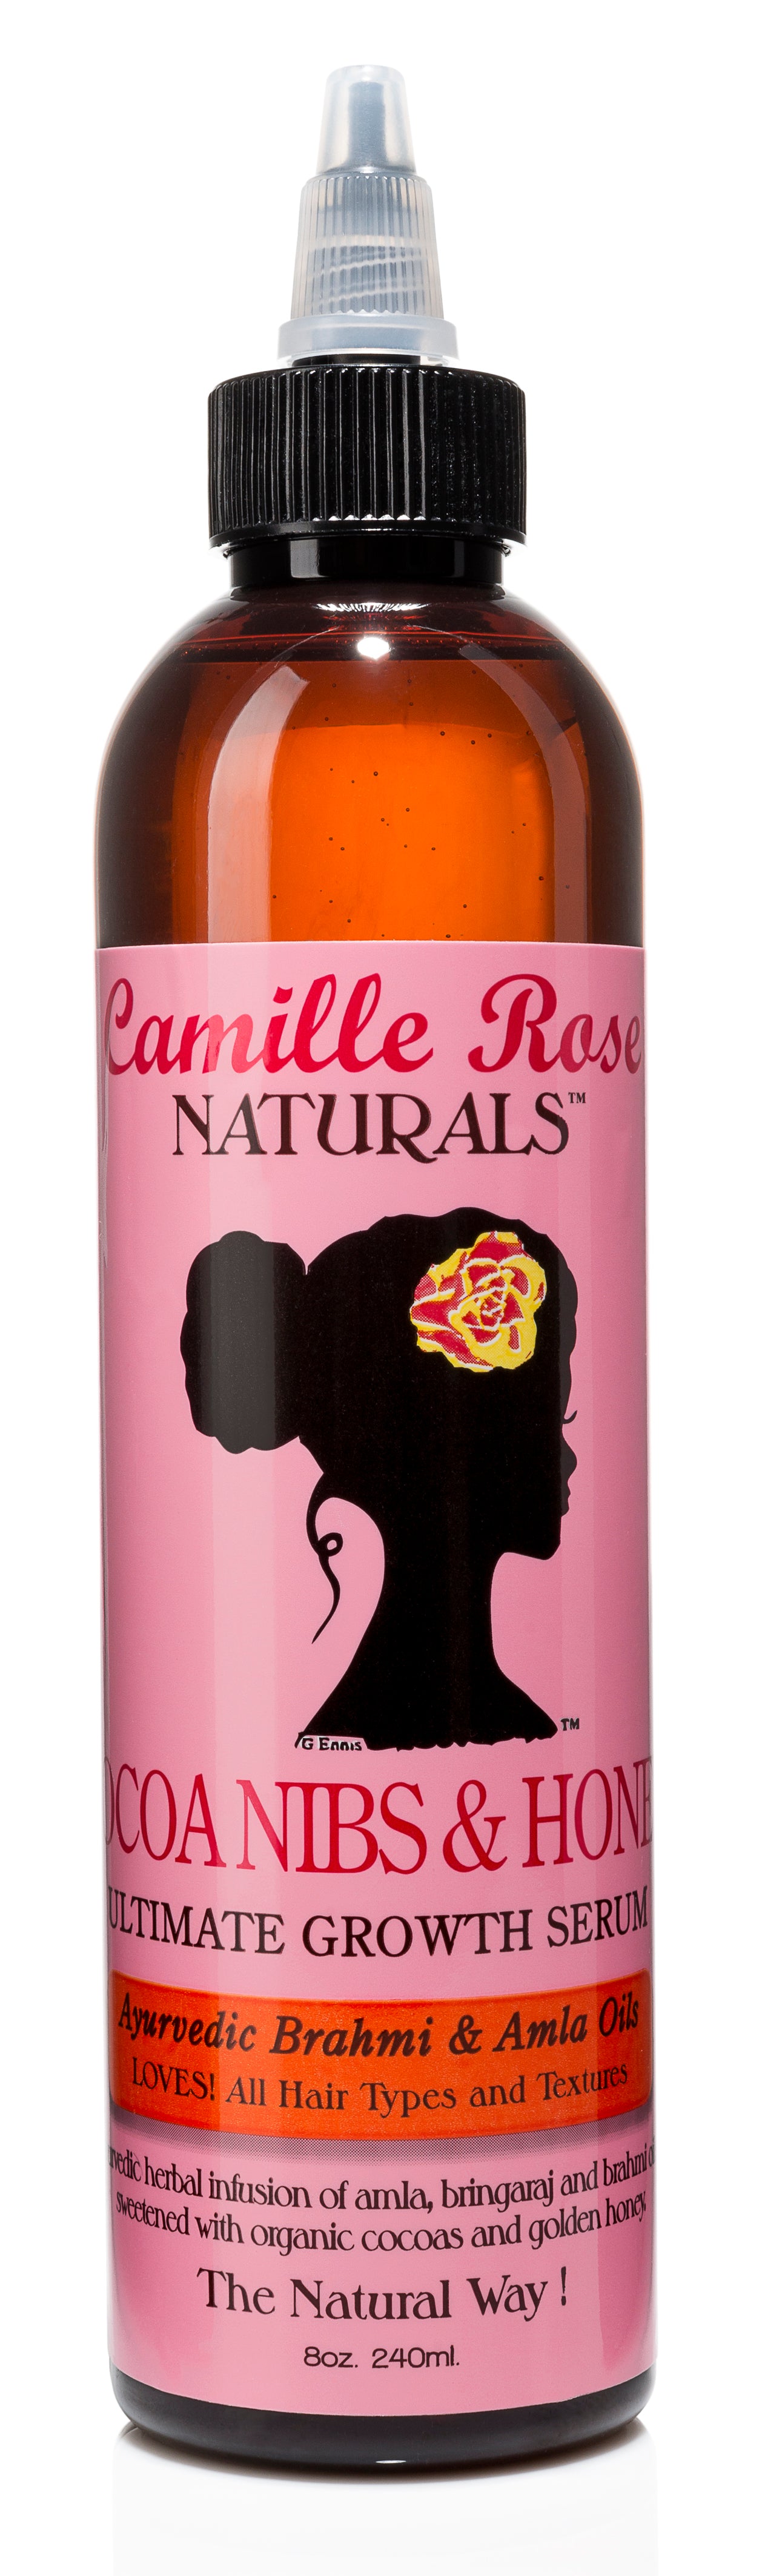 Camille Rose Naturals Cocoa Nibs & Honey Ultimate Growth Serum - 8 Oz